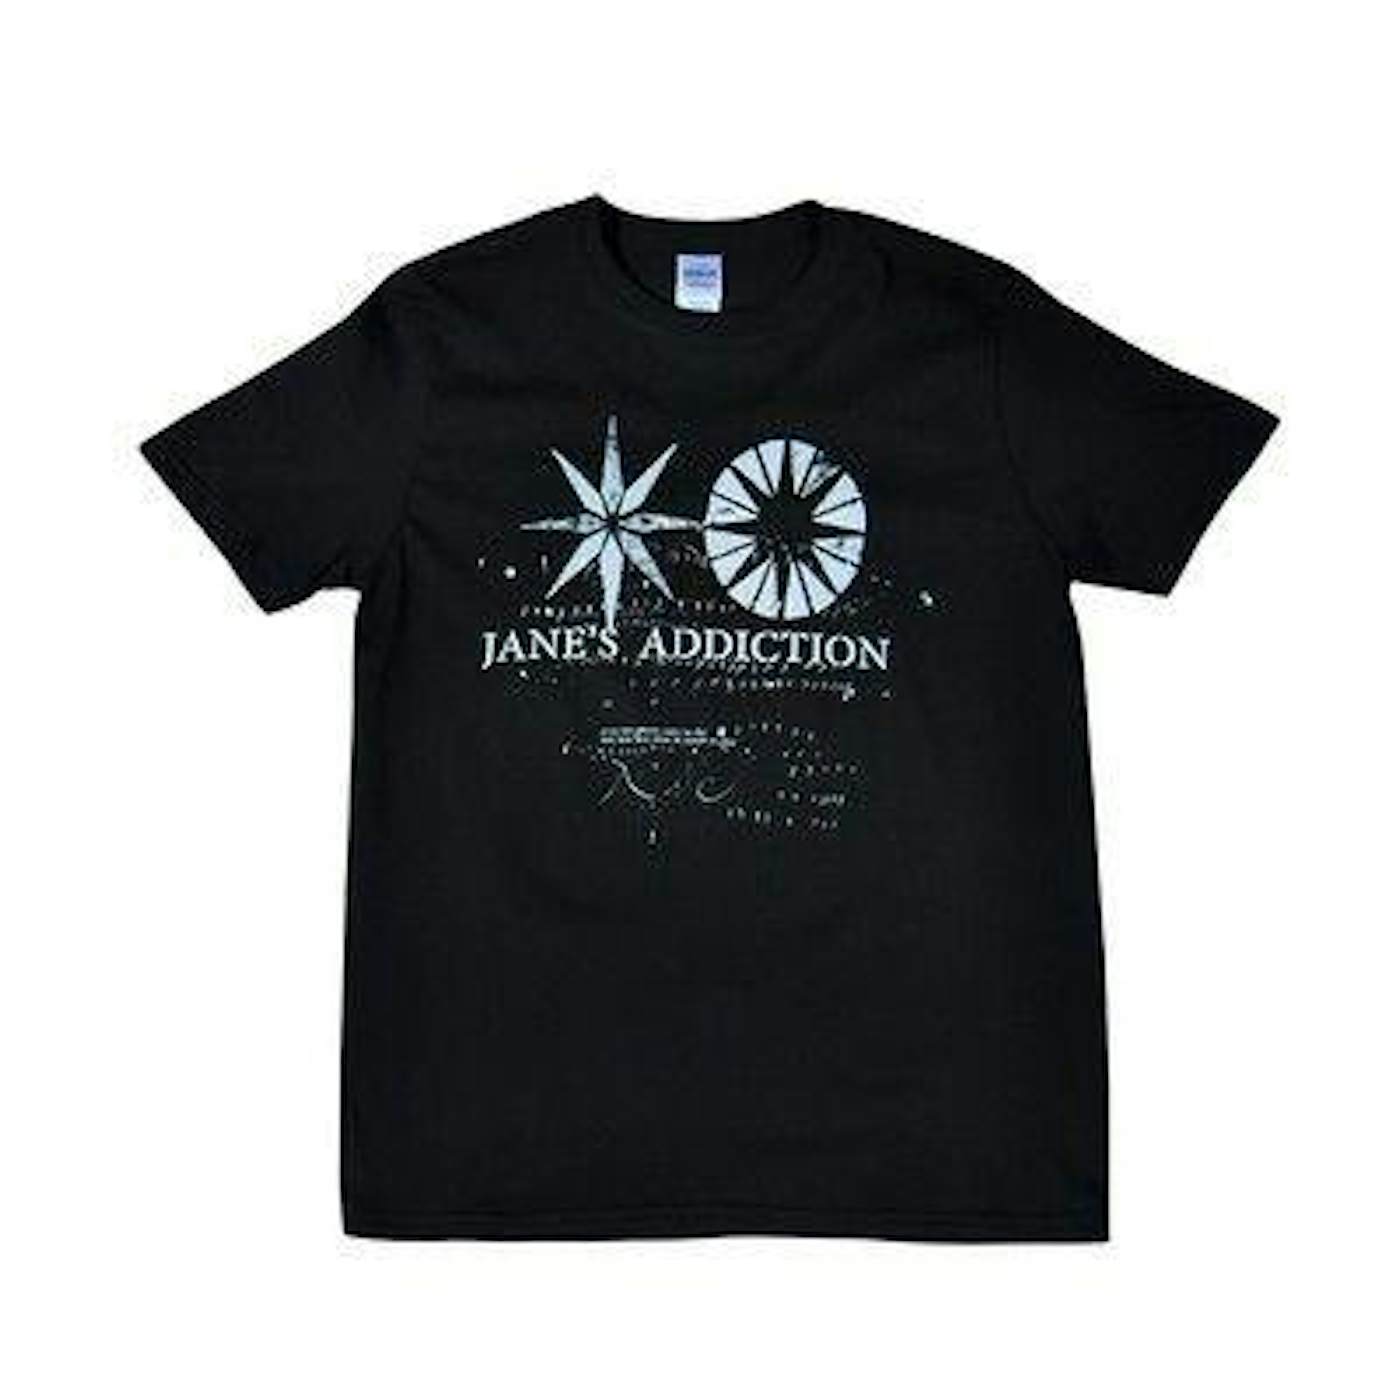 Jane's Addiction Even the Ghosts Black T-Shirt